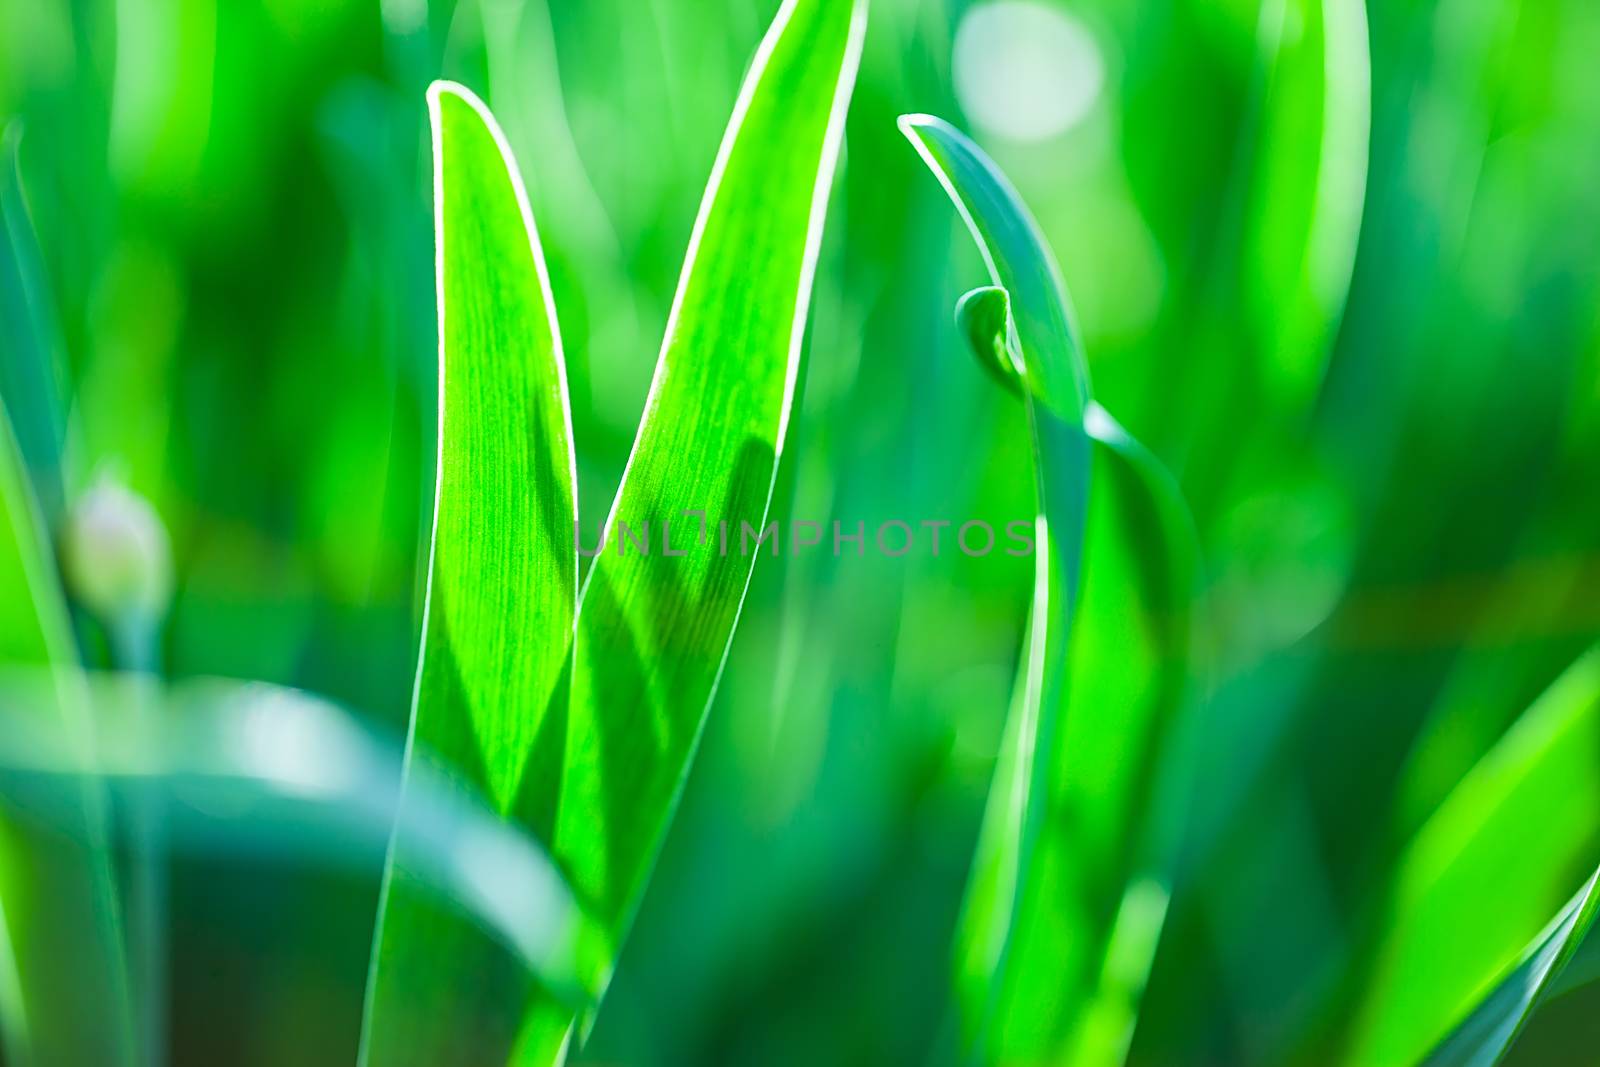 The Beautiful spring flowers background. Nature bokeh